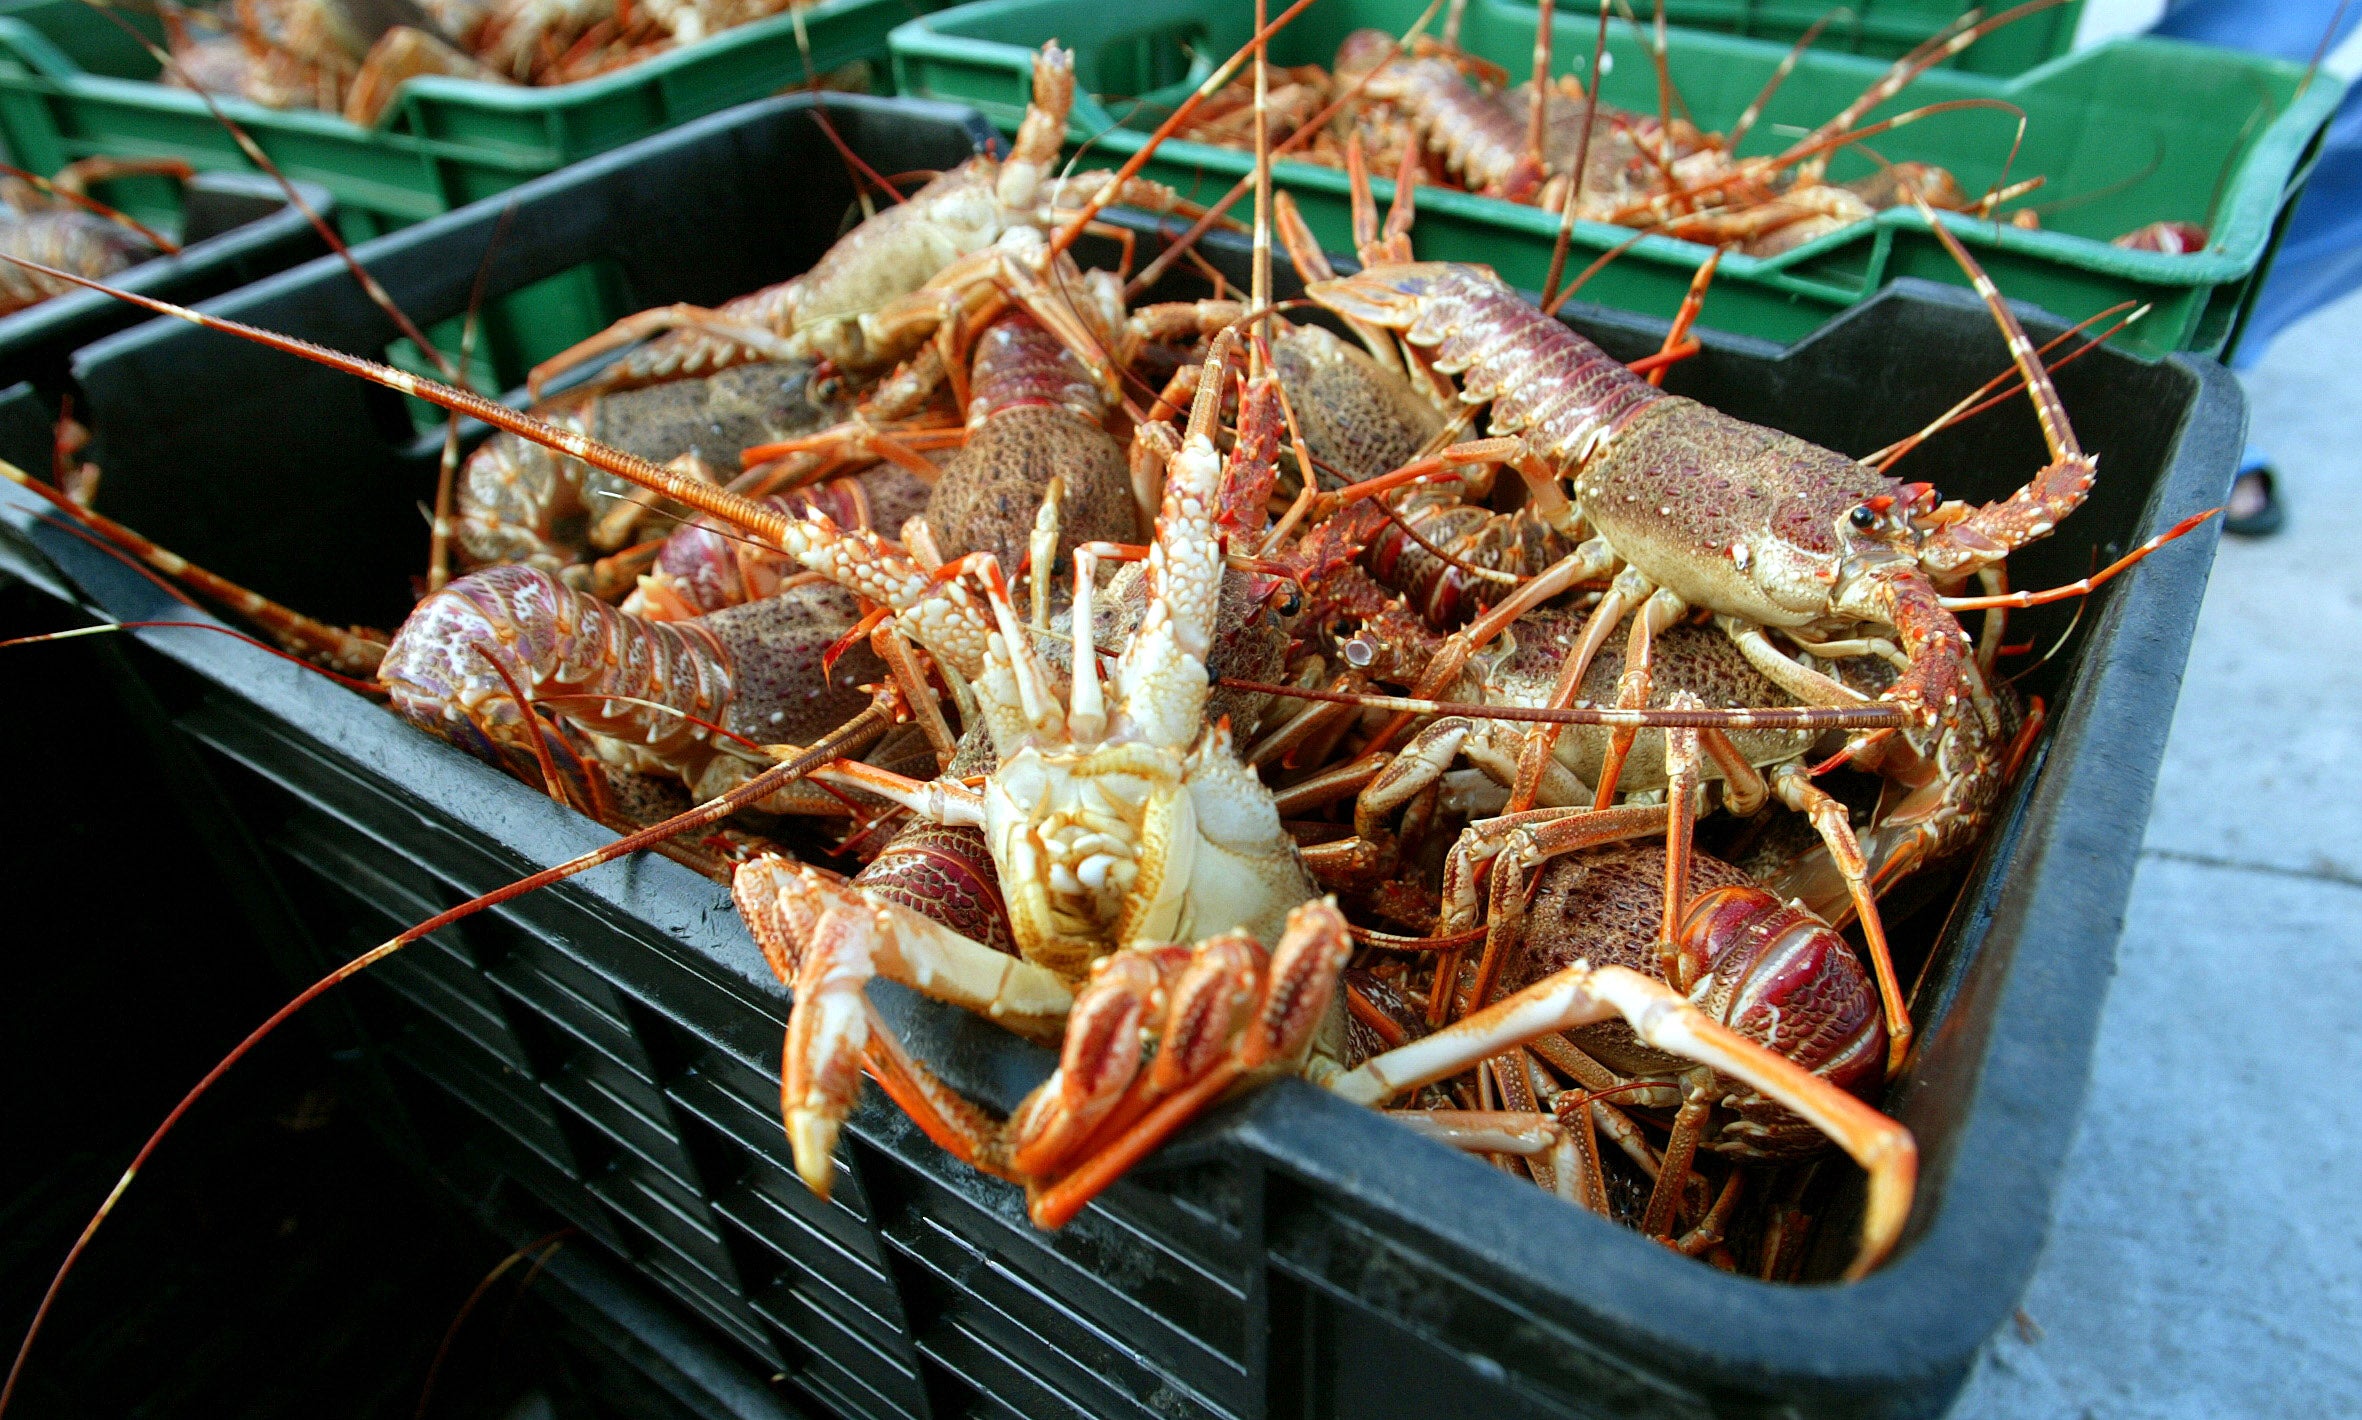 Crates of Rock Lobster are offloaded on the dock of Cape Town's Kalk Bay harbour, September 17, 2003. Image credit: Mike Hutchings/REUTERS